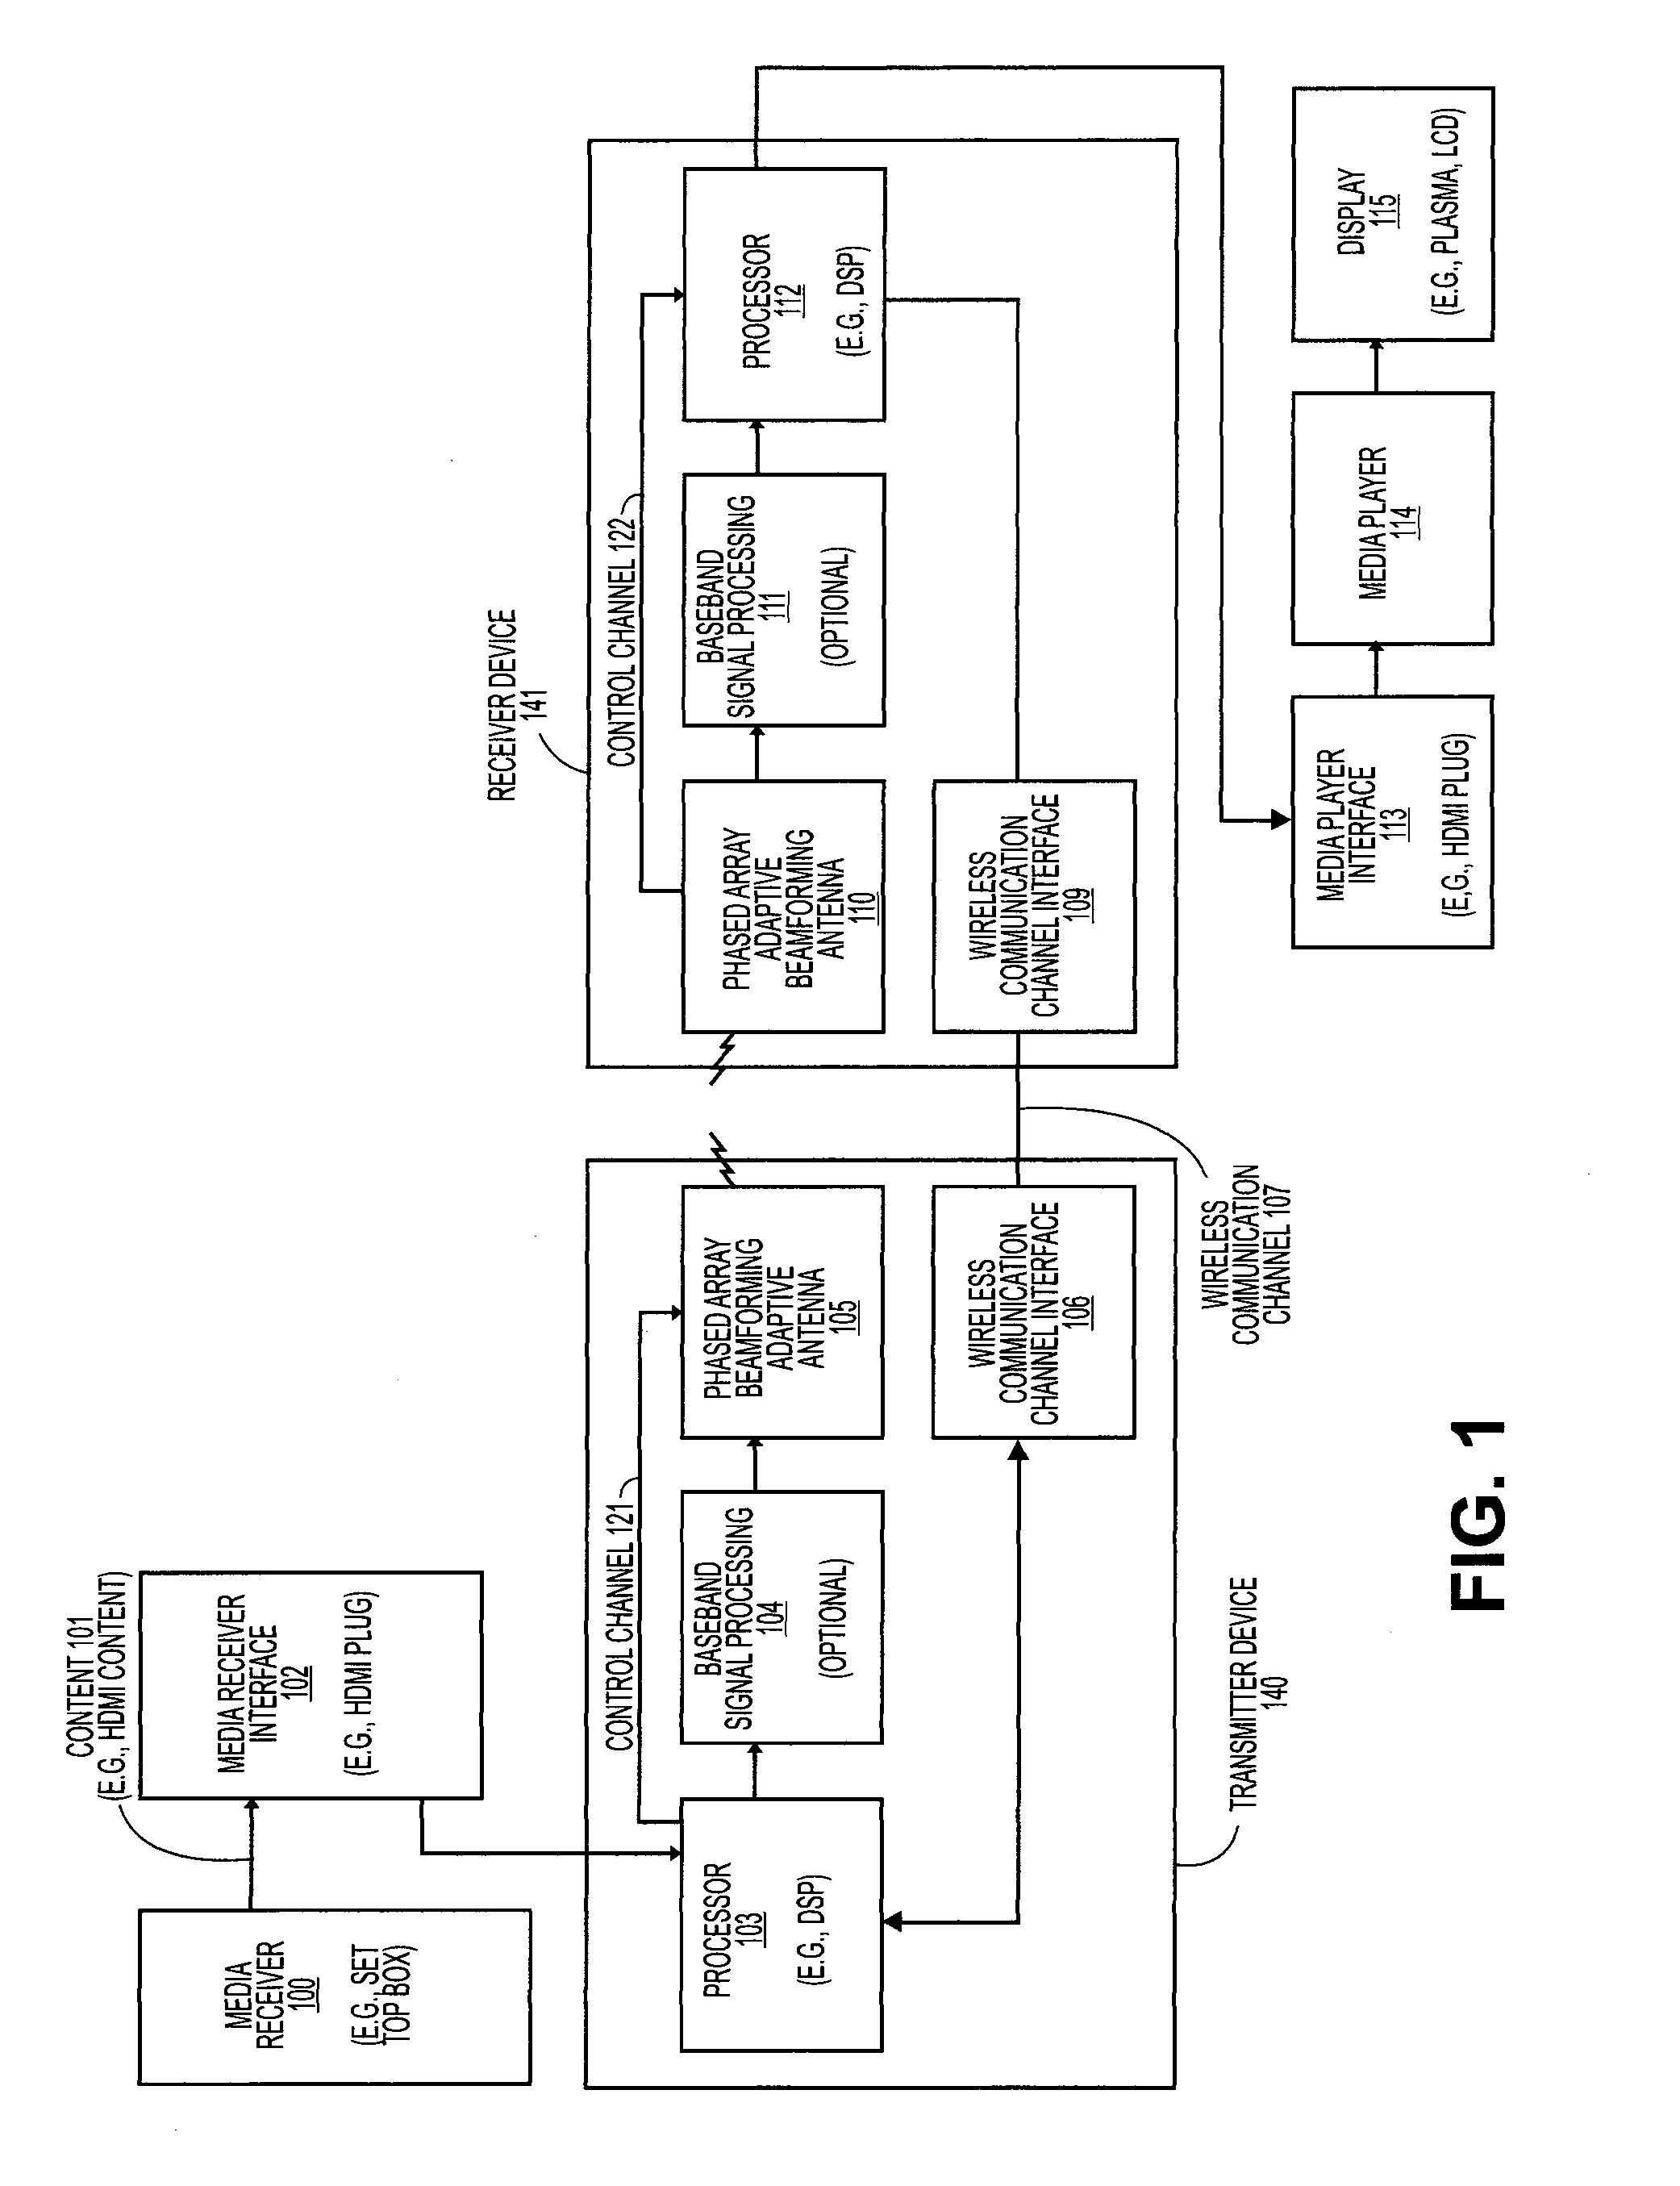 Adaptive beam-steering methods to maximize wireless link budget and reduce delay-spread using multiple transmit and receive antennas